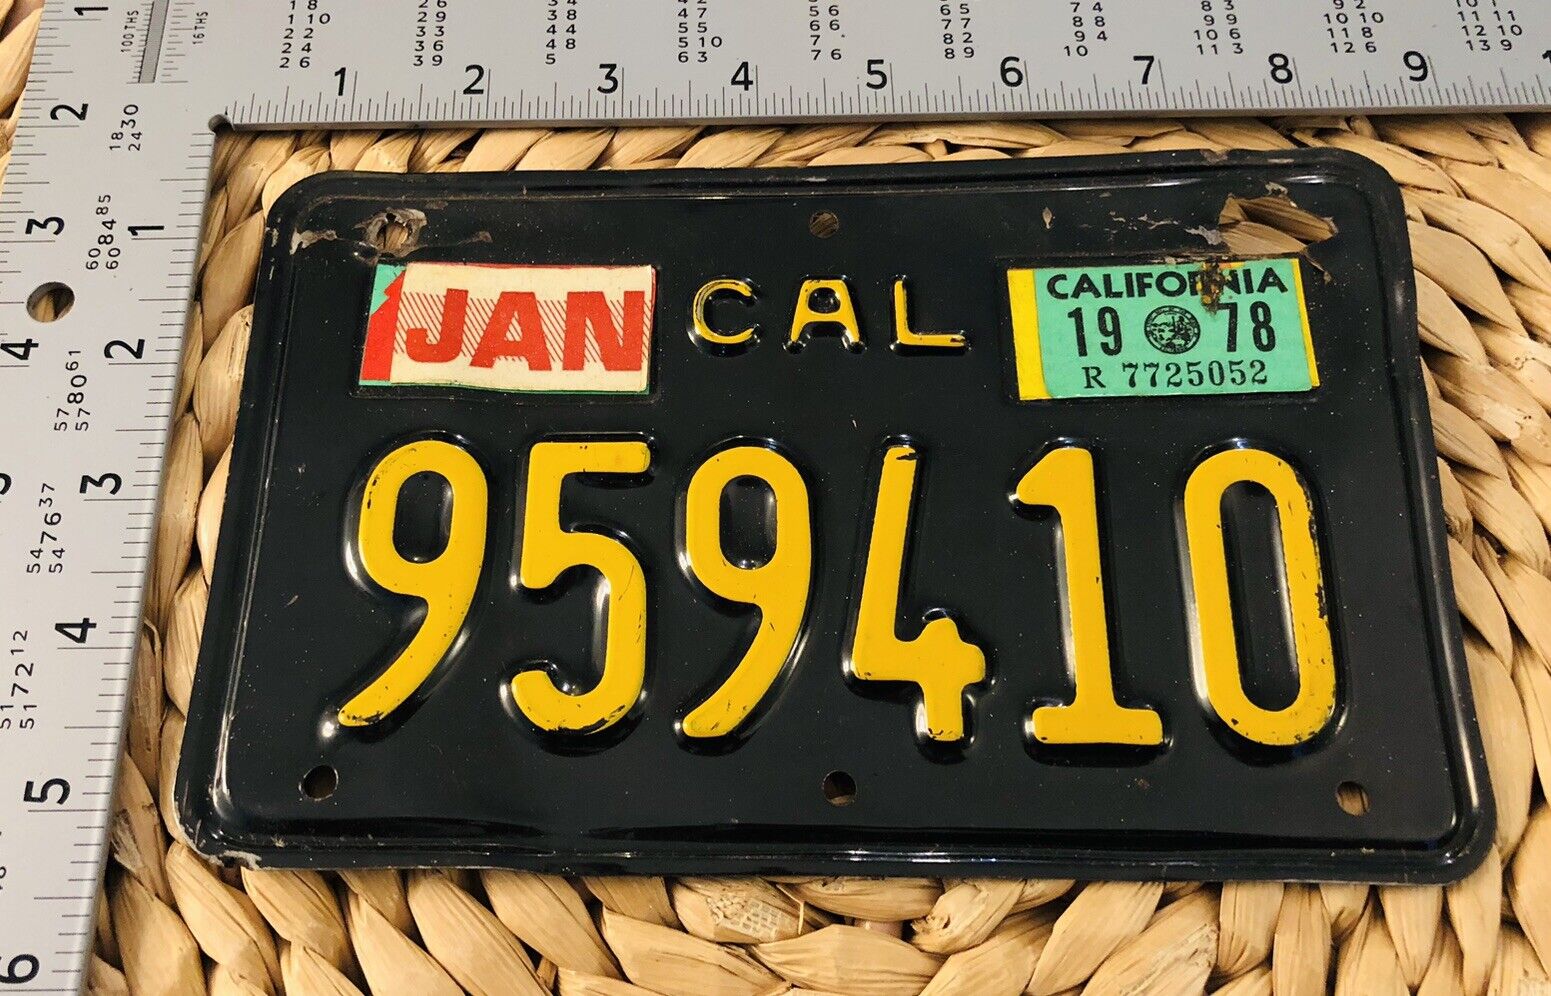 1963 To 1970 1978 California MOTORCYCLE License Plate Harley BMW Indian 959410